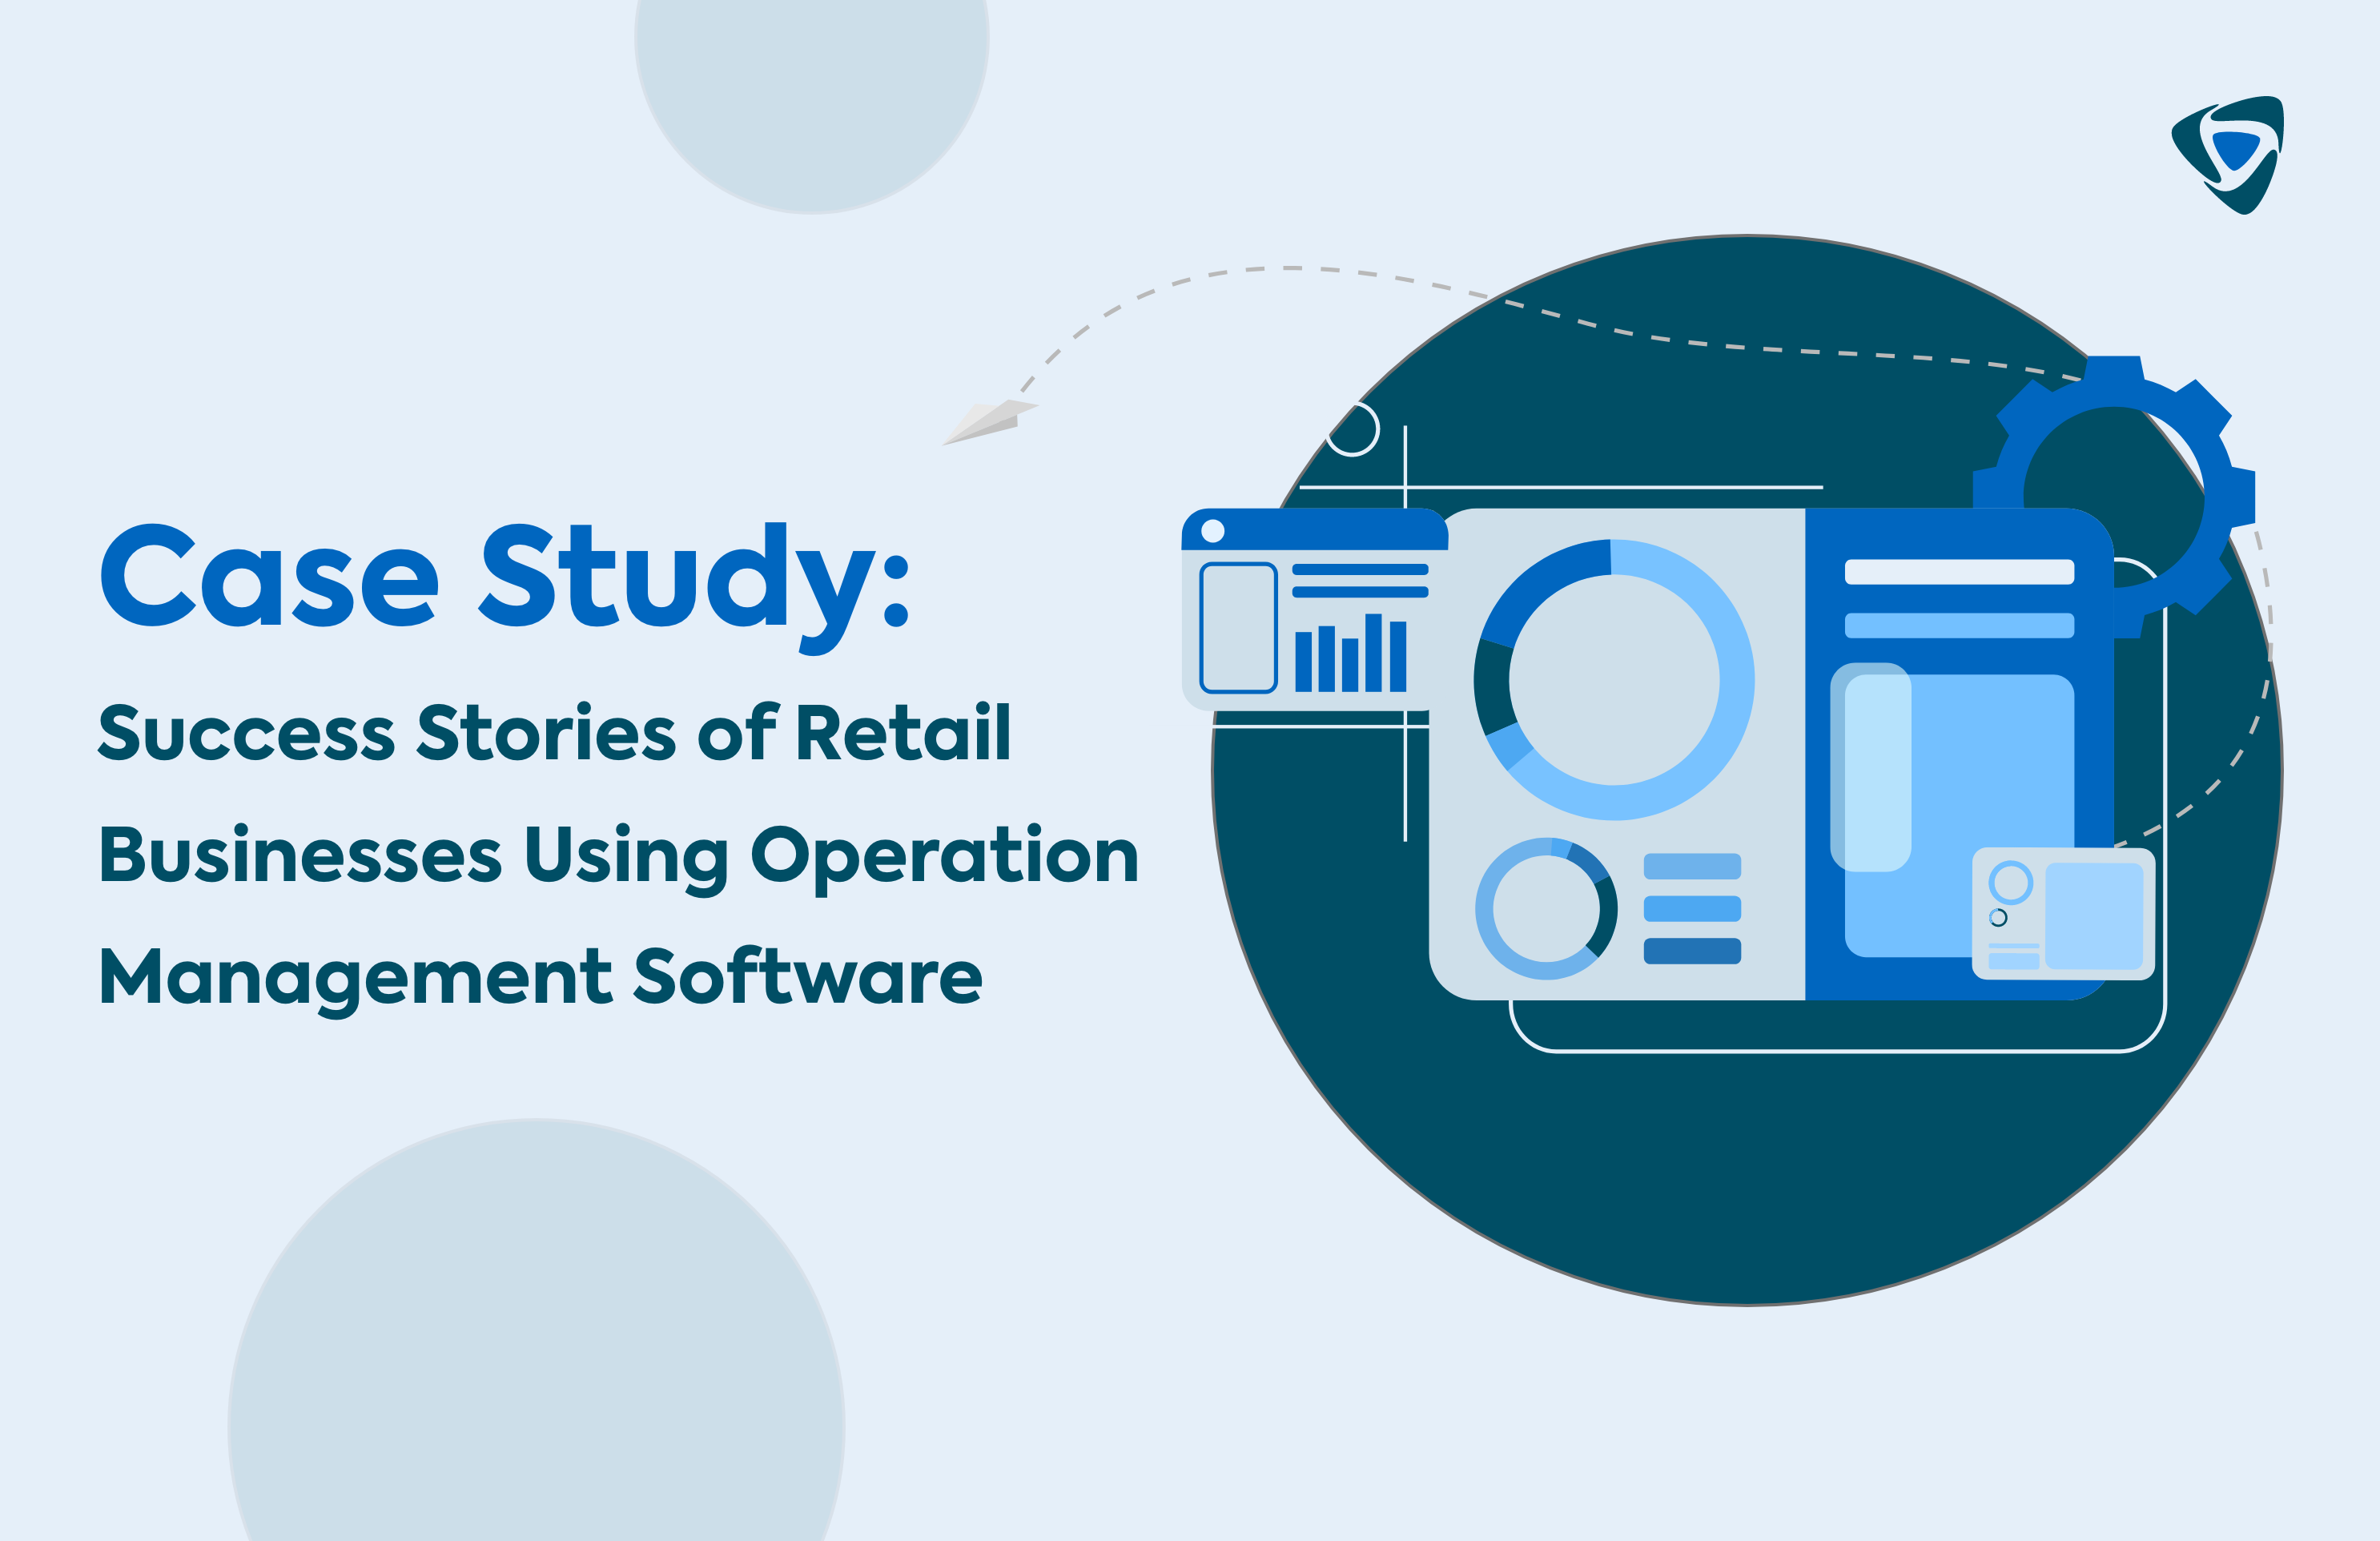 Success Stories of Retail Businesses Using Operation Management Software